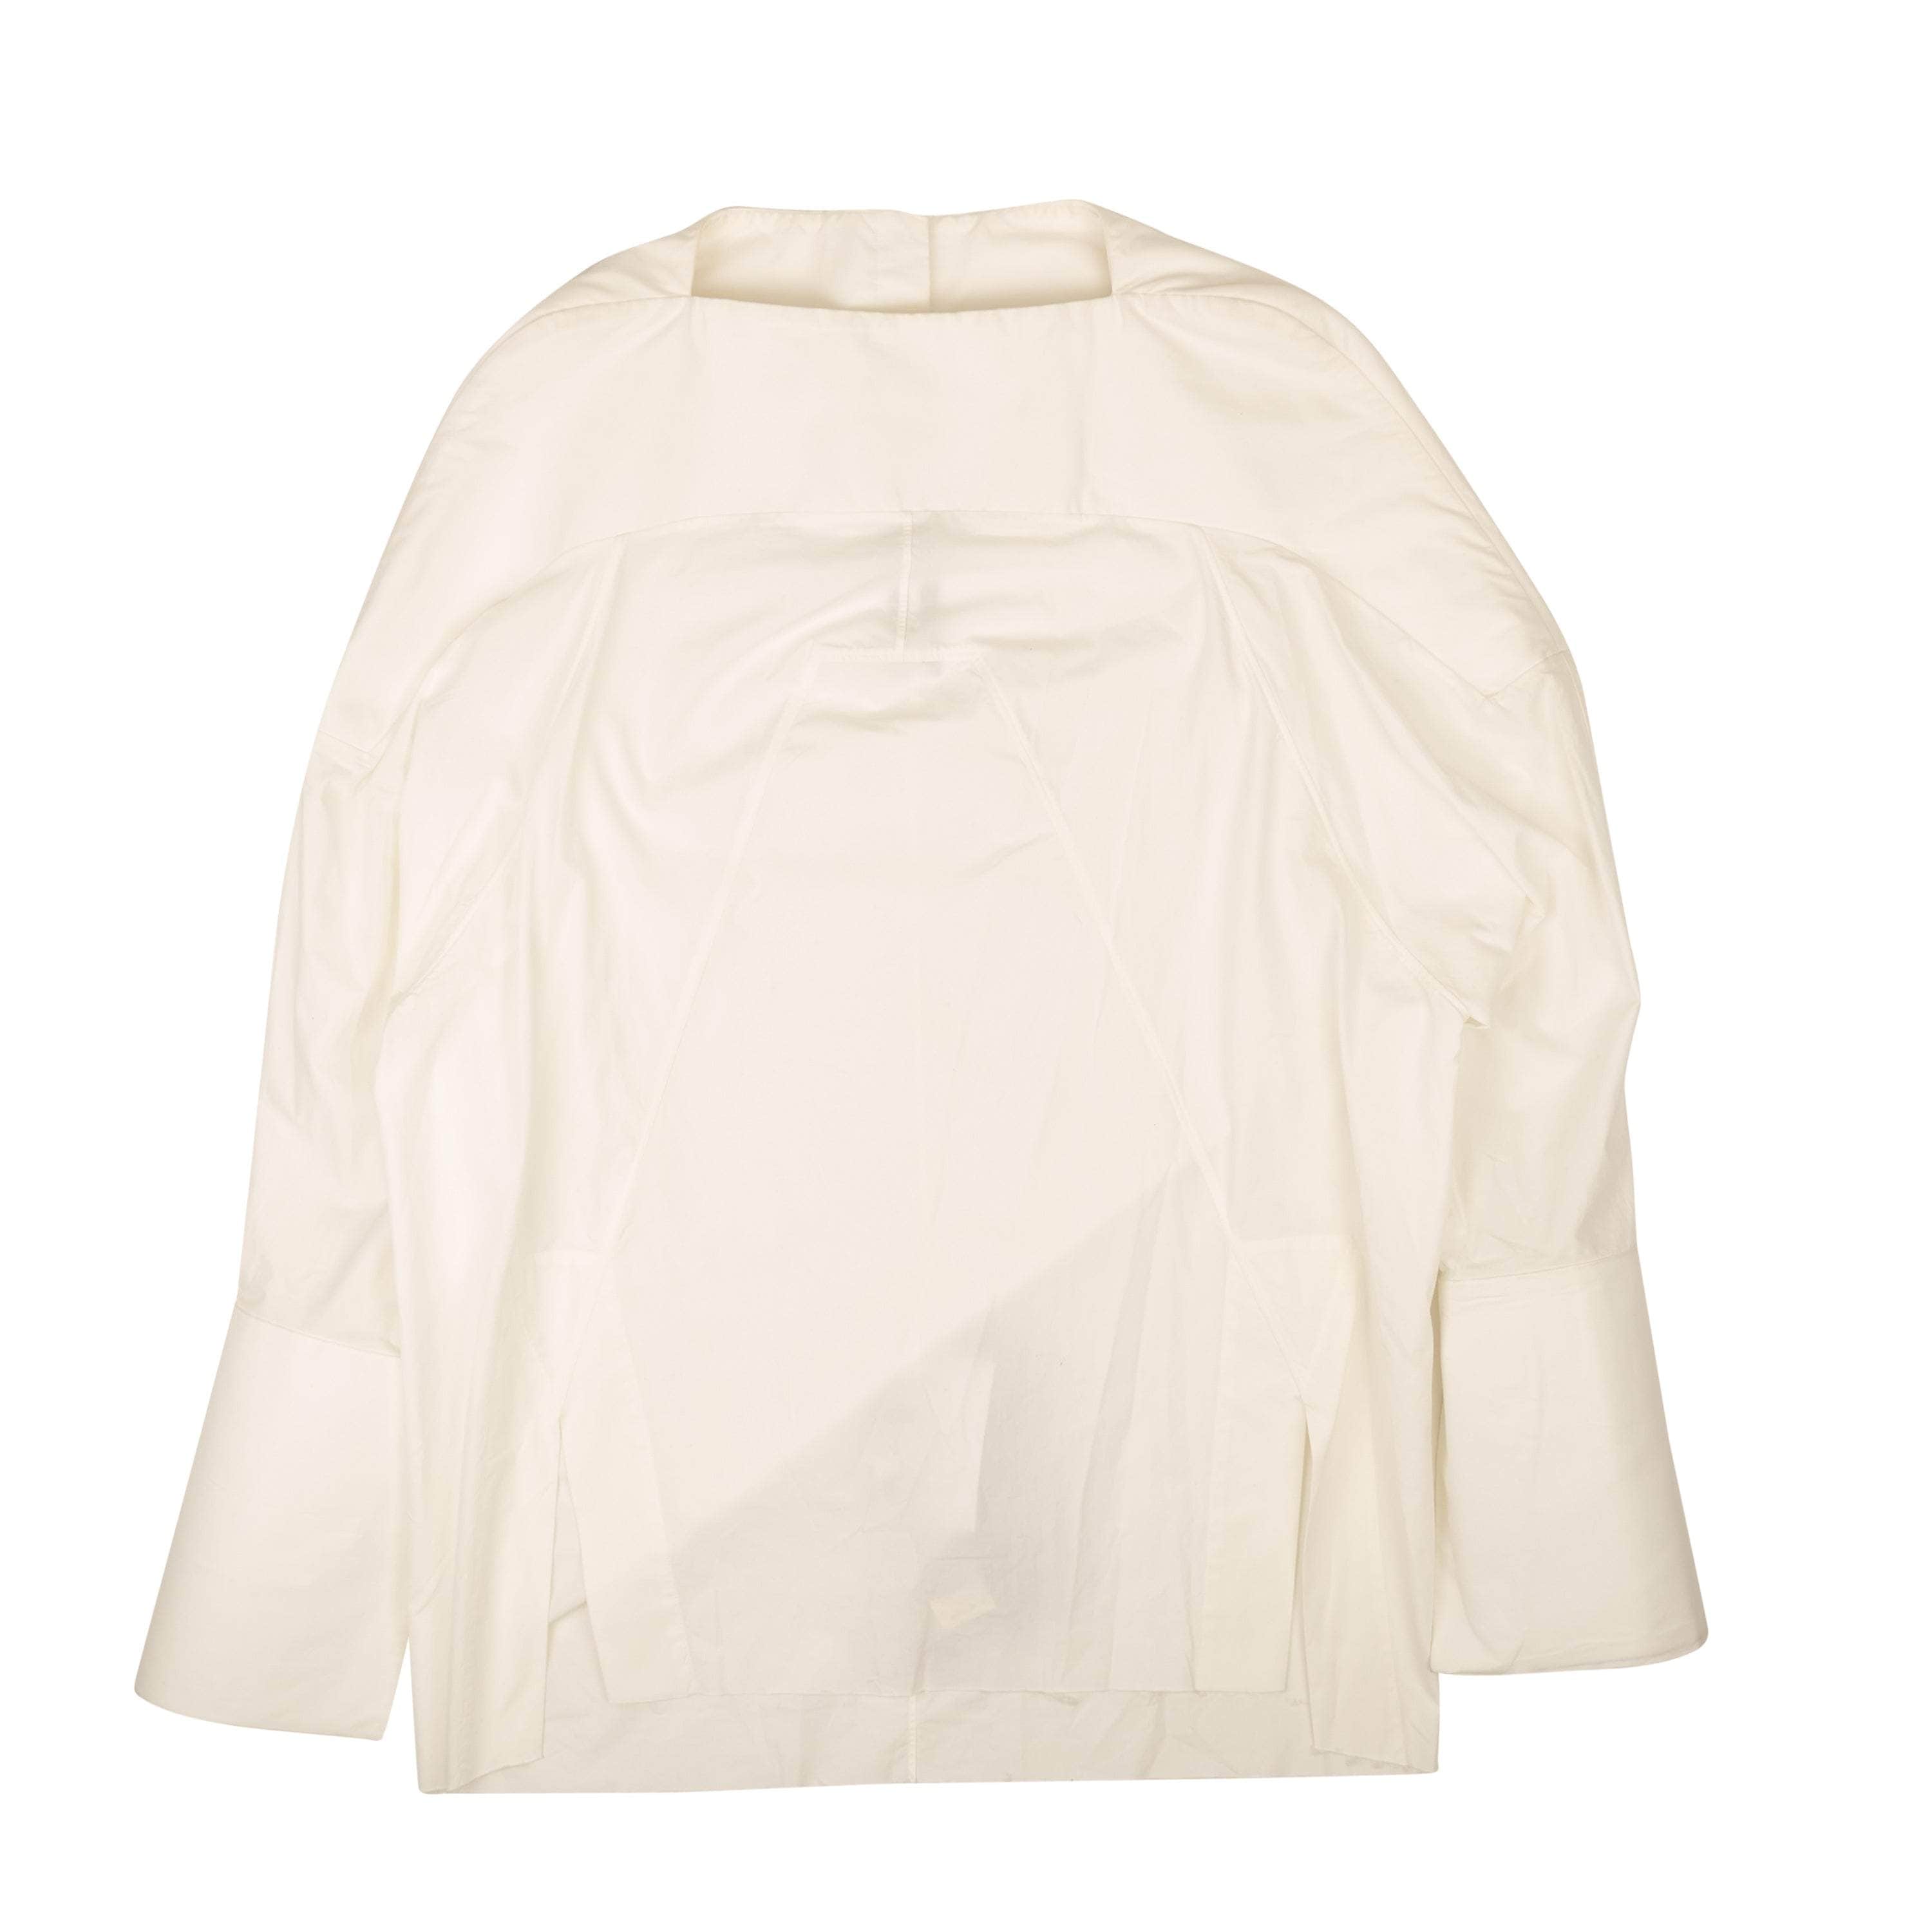 Rick Owens 750-1000, channelenable-all, chicmi, couponcollection, gender-womens, main-clothing, rick-owens, size-38 38 Off White Milk Boat Neck Collage Tunic T-Shirt 95-ROW-1035/38 95-ROW-1035/38